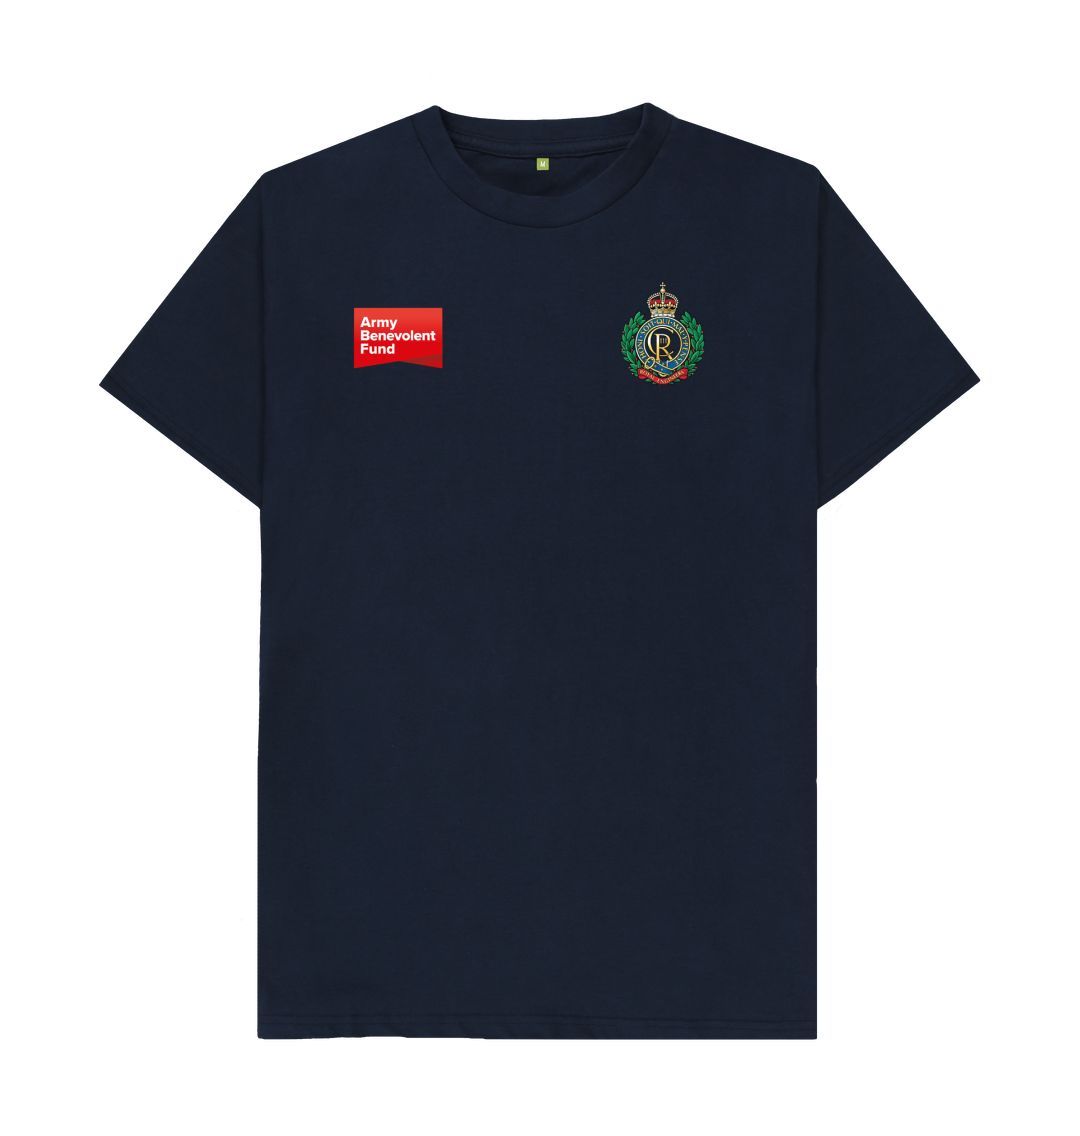 Corps of Royal Engineers Unisex T-shirt - Army Benevolent Fund